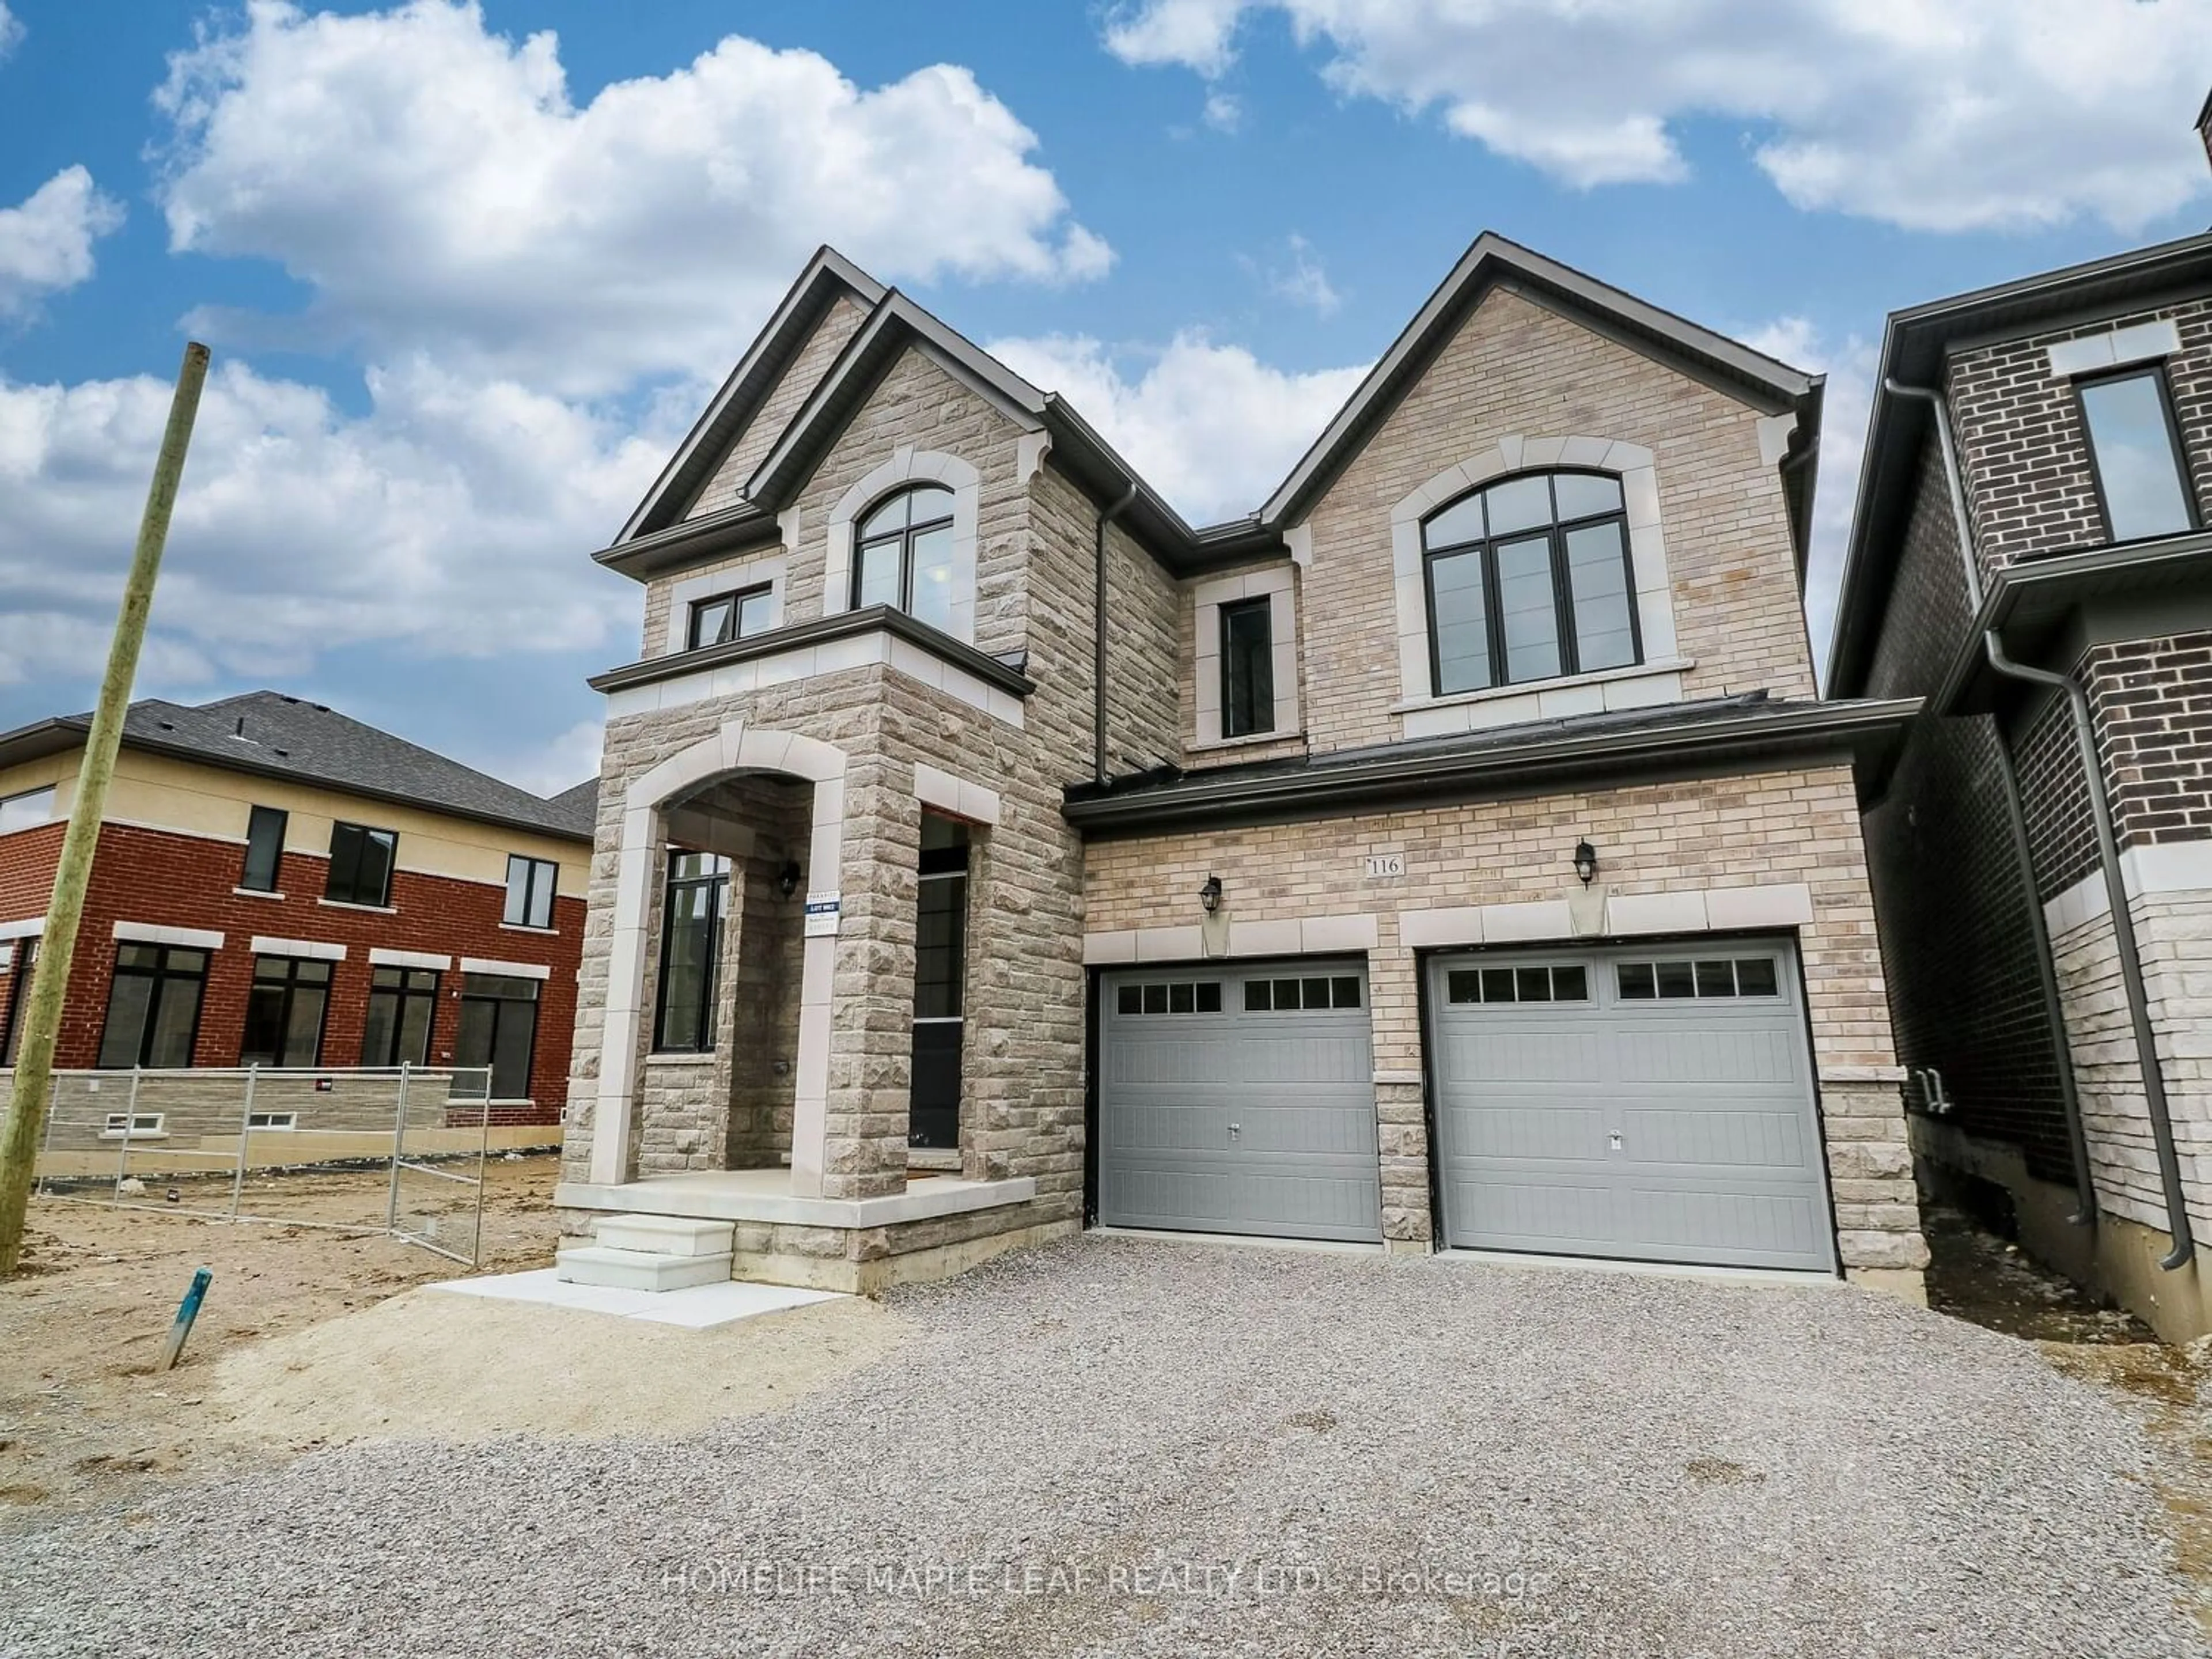 Home with brick exterior material for 116 Weslock Cres, Aurora Ontario L4G 7Y9